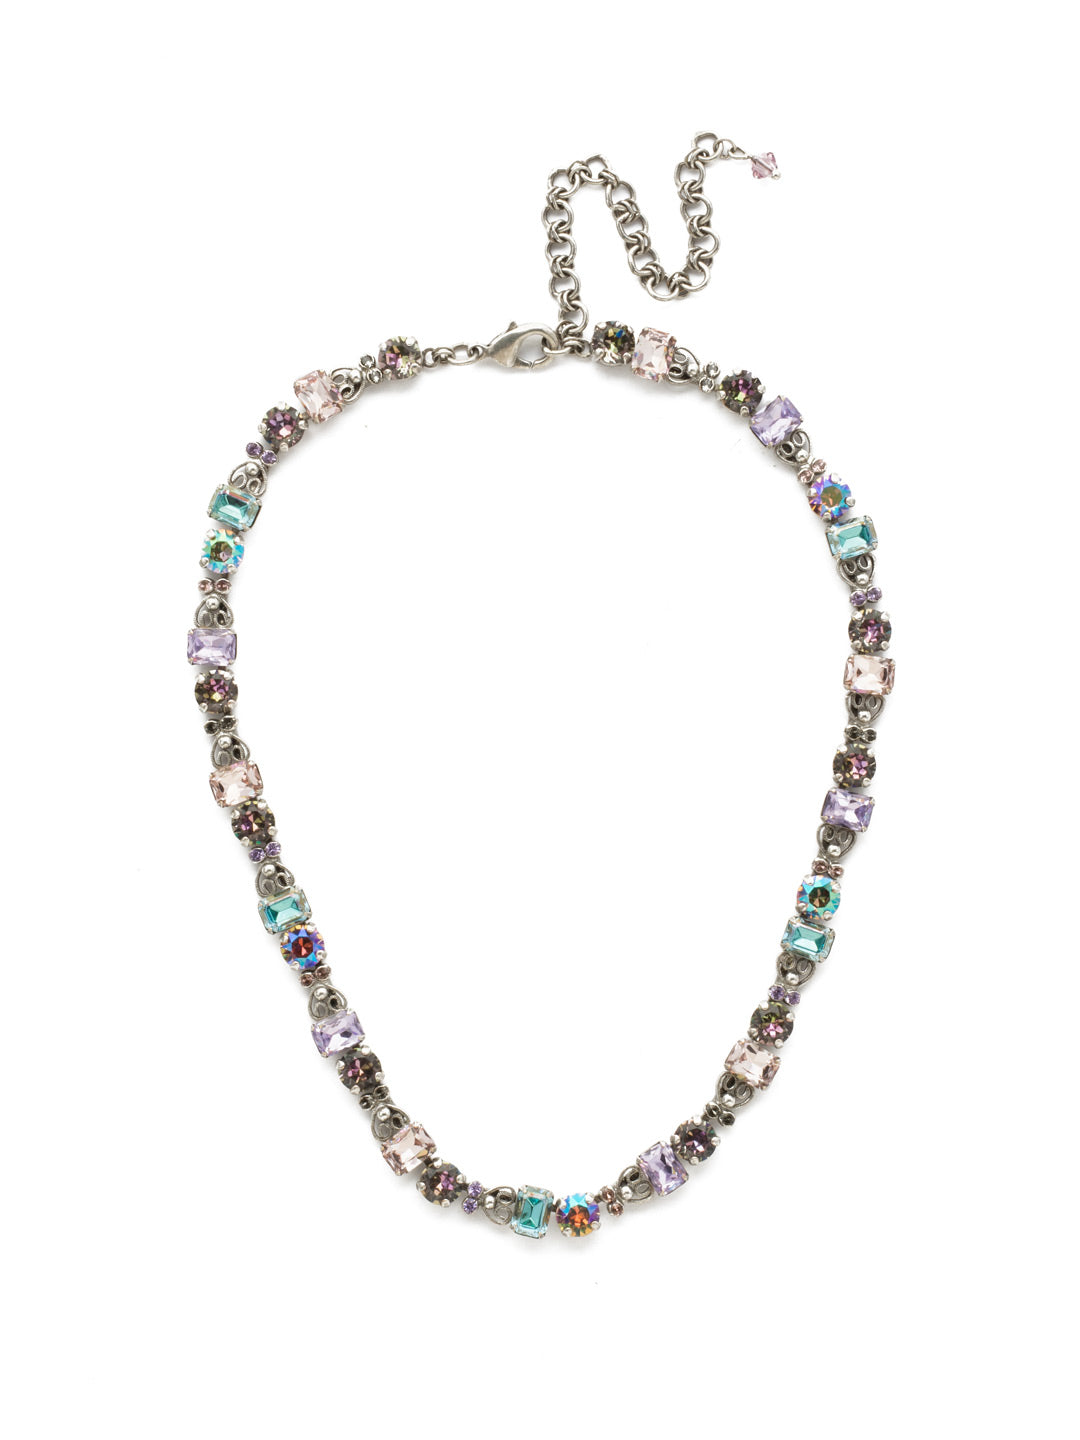 Orchid Necklace - NDU23ASLPA - Complete with a pattern arrangement of round and square crystals enclosed by a ball and chain clasp.